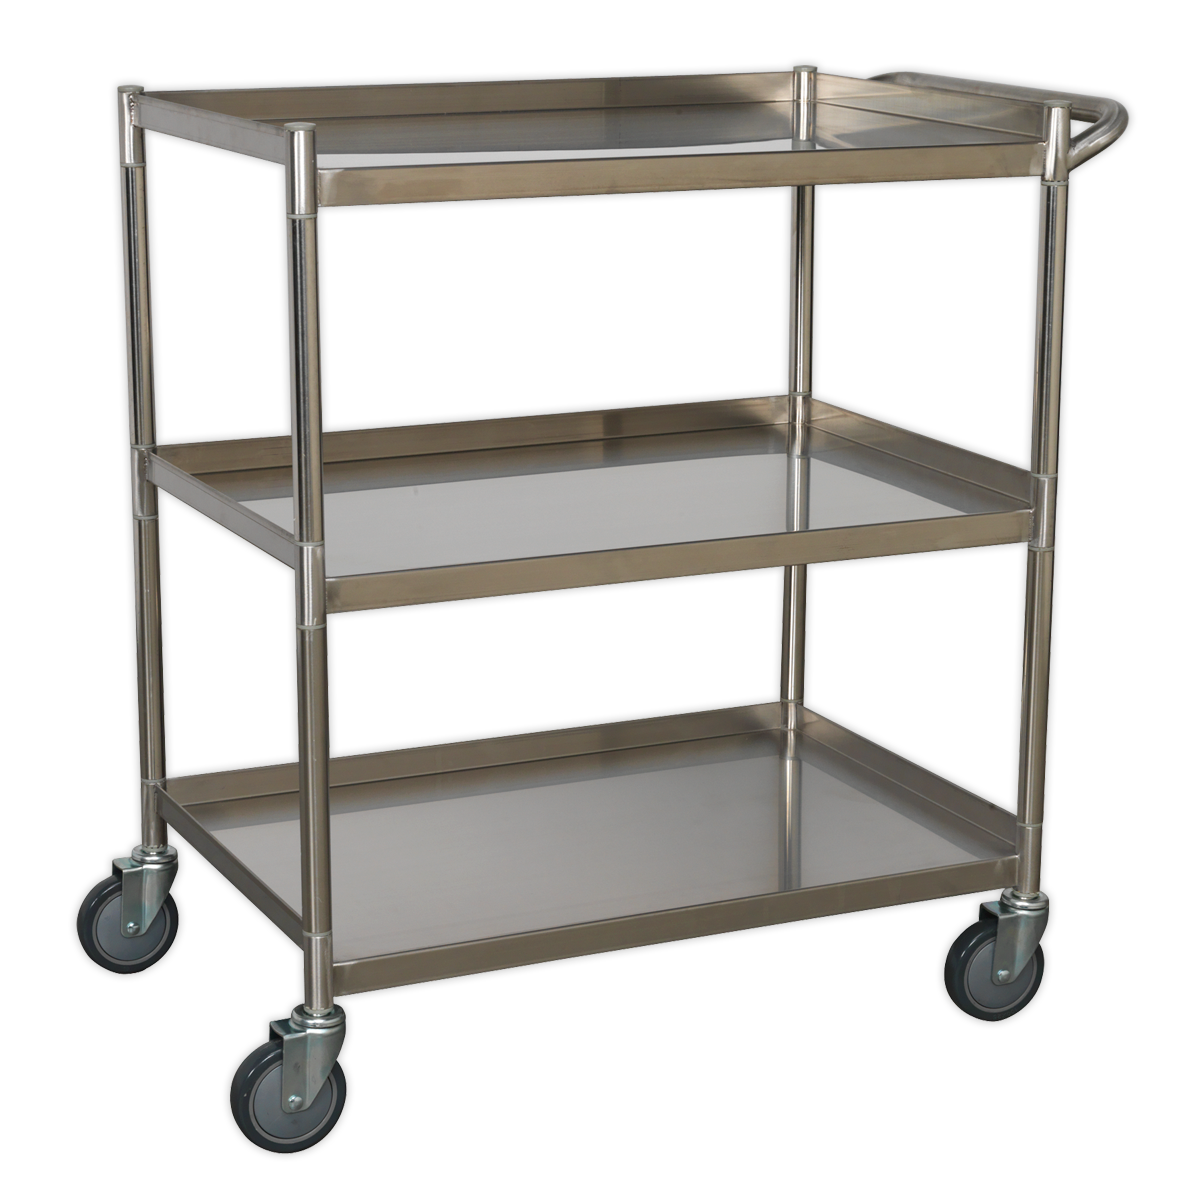 Workshop Trolley 3-Level Stainless Steel - CX410SS - Farming Parts